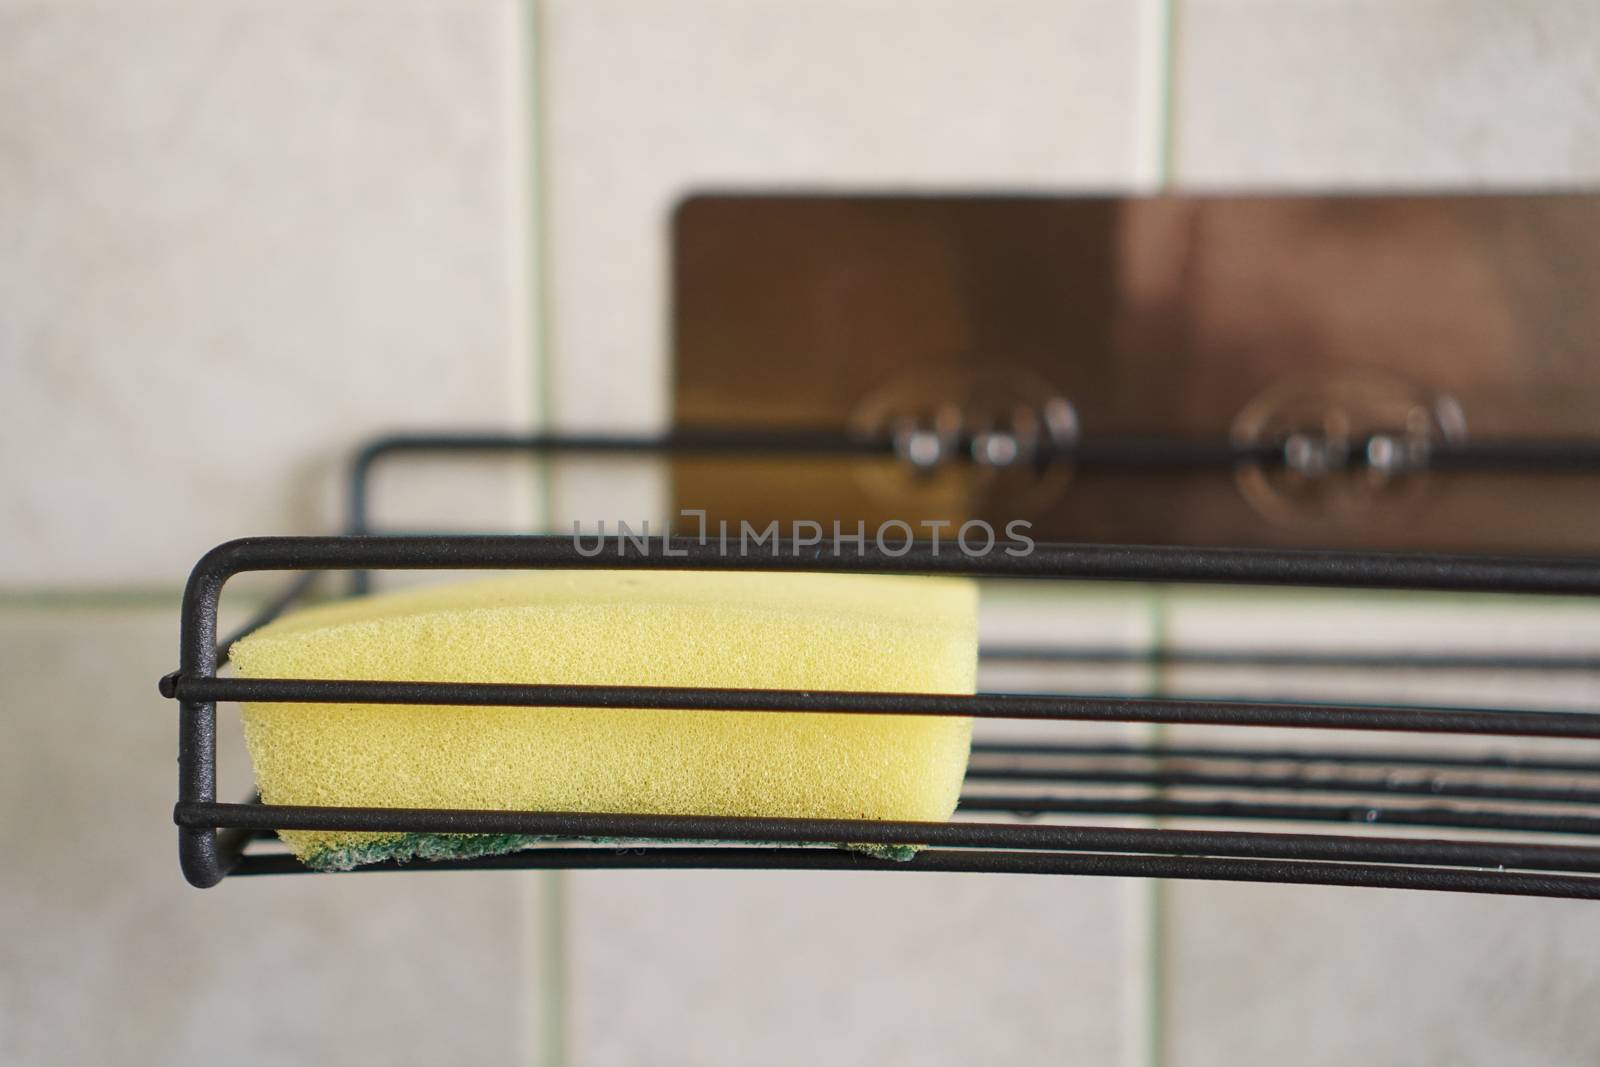 Sponge for washing dishes on metal shelf in kitchen. Concept of cleaning. Close-up interior. No people.